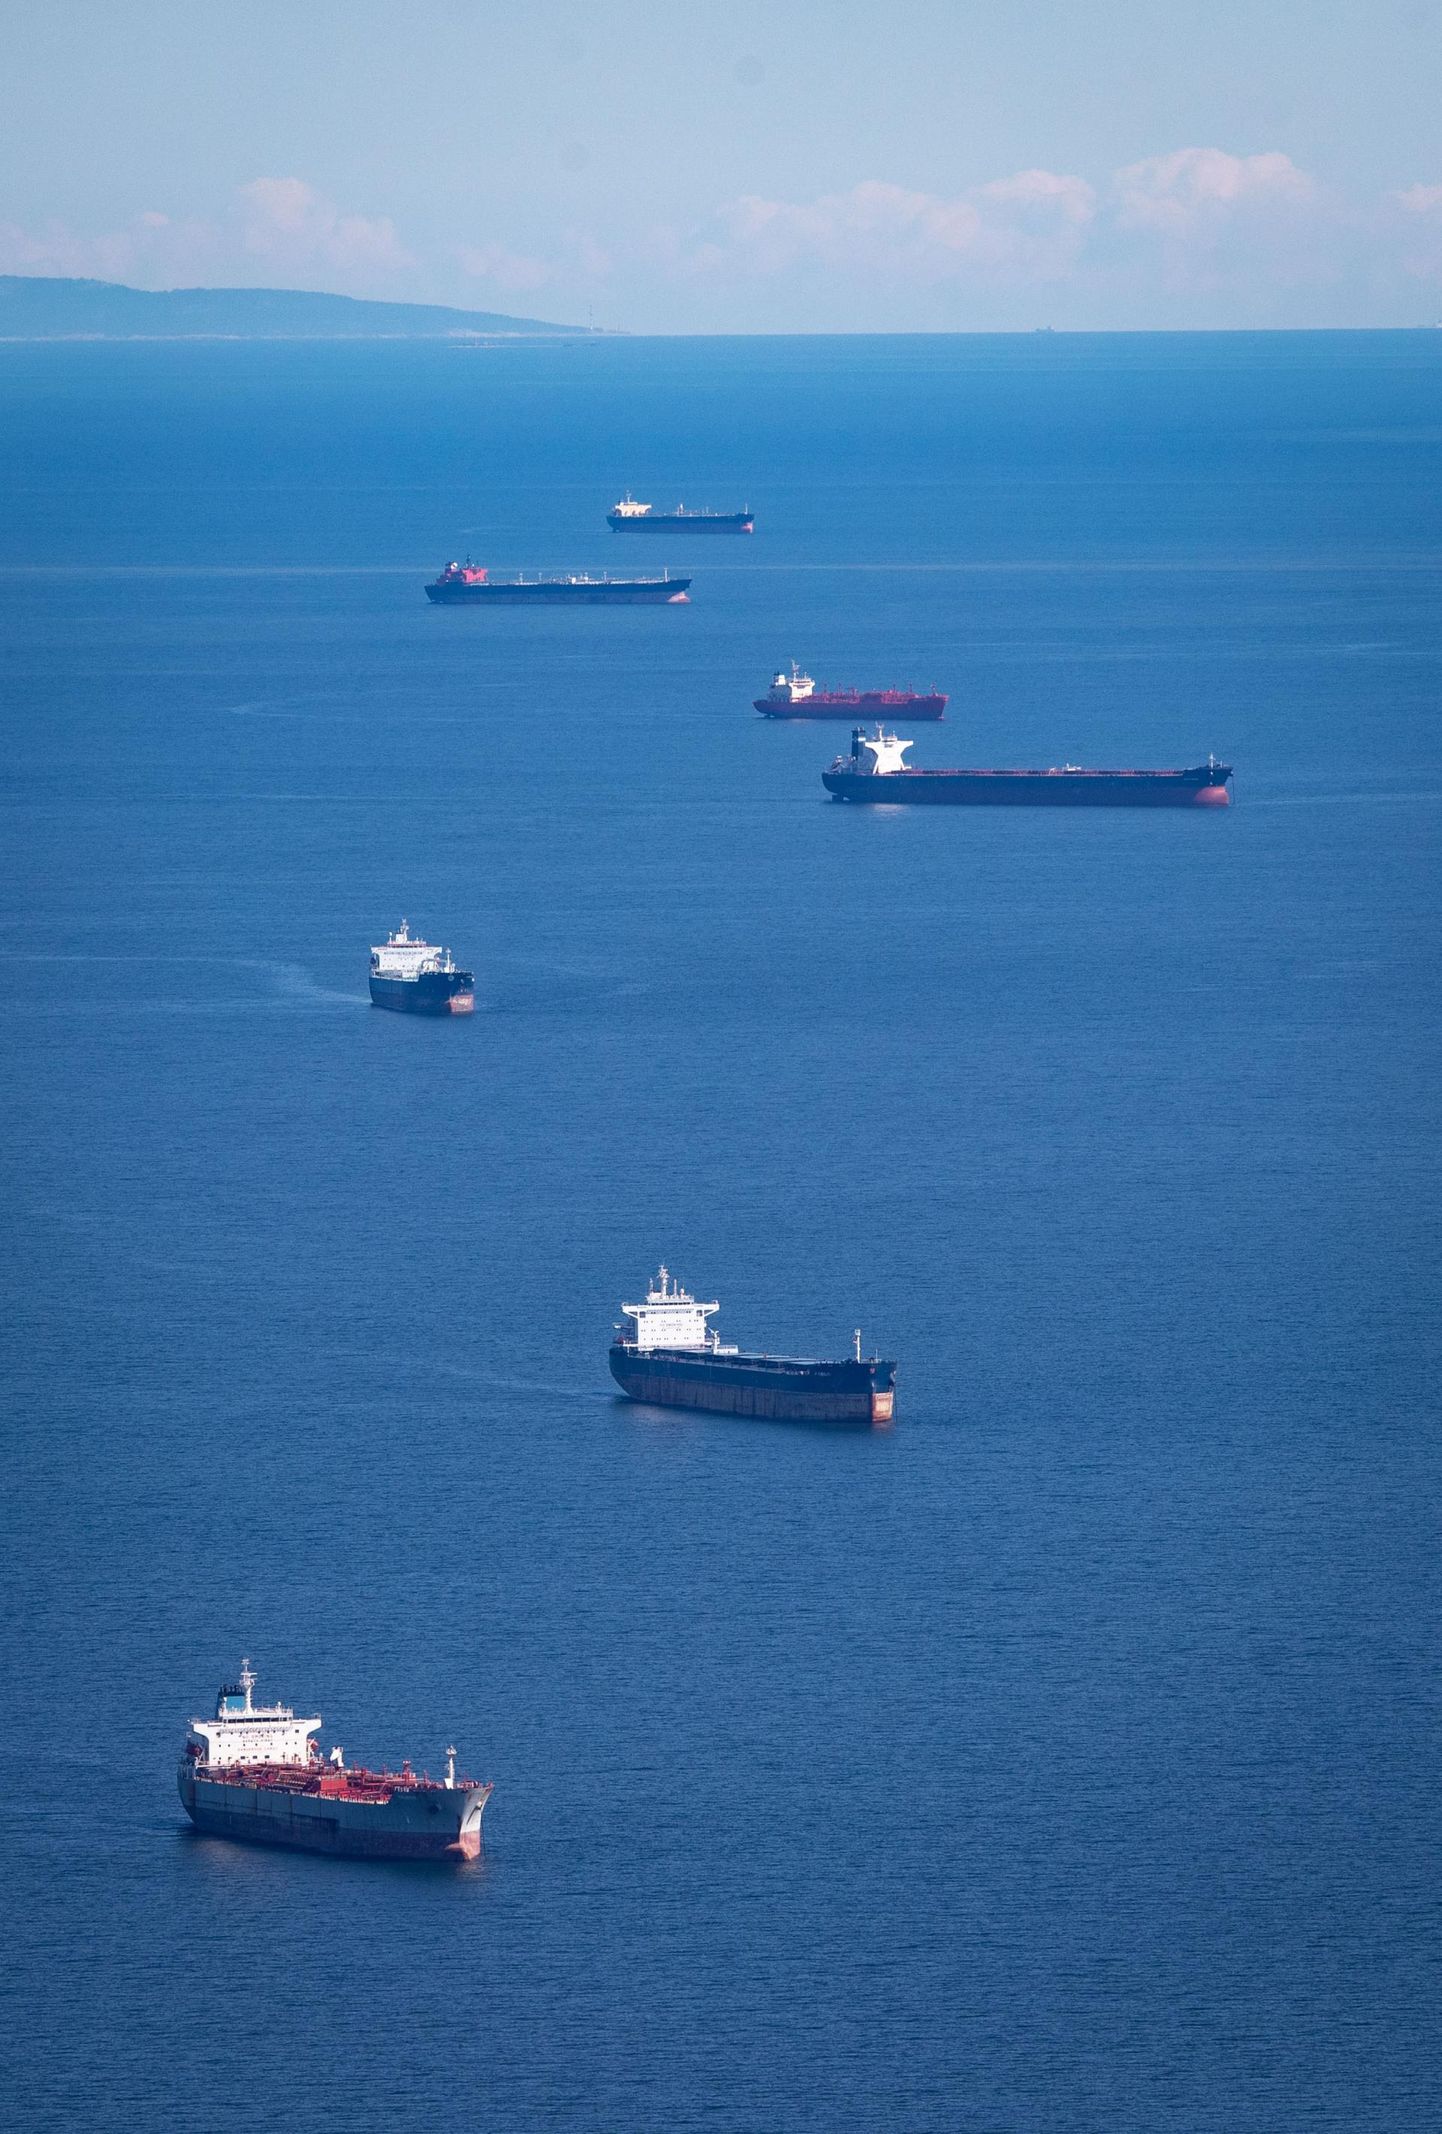 An unofficial anchorage area for tankers and cargo ships waiting to enter Russian ports in the part of the Gulf of Finland that is part of the Estonian economic zone.